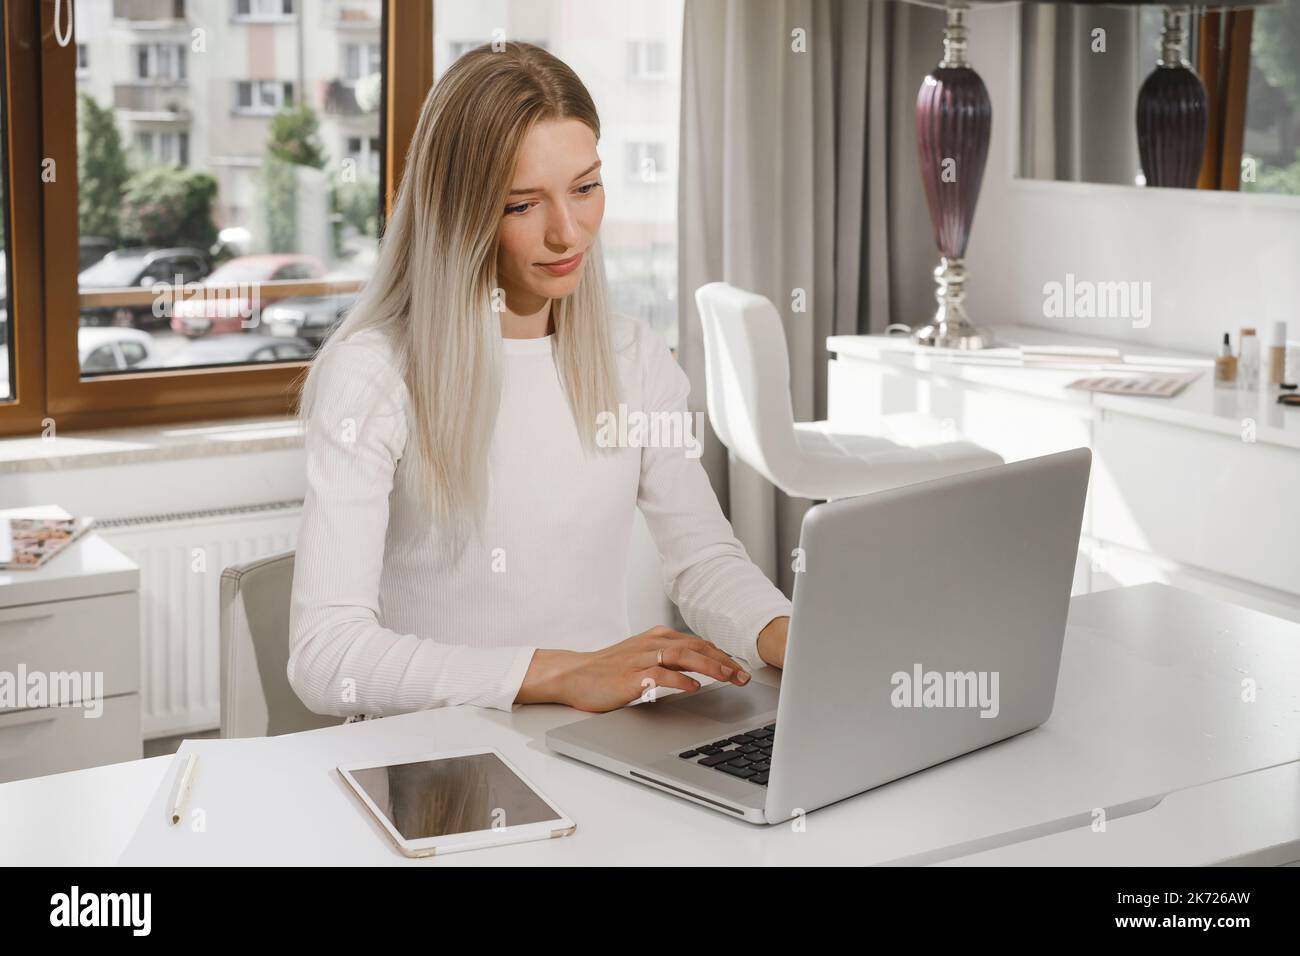 Woman works at the reception in a beauty salon. Typing something on laptop and talks on the phone with client, making appointments in studio Stock Photo